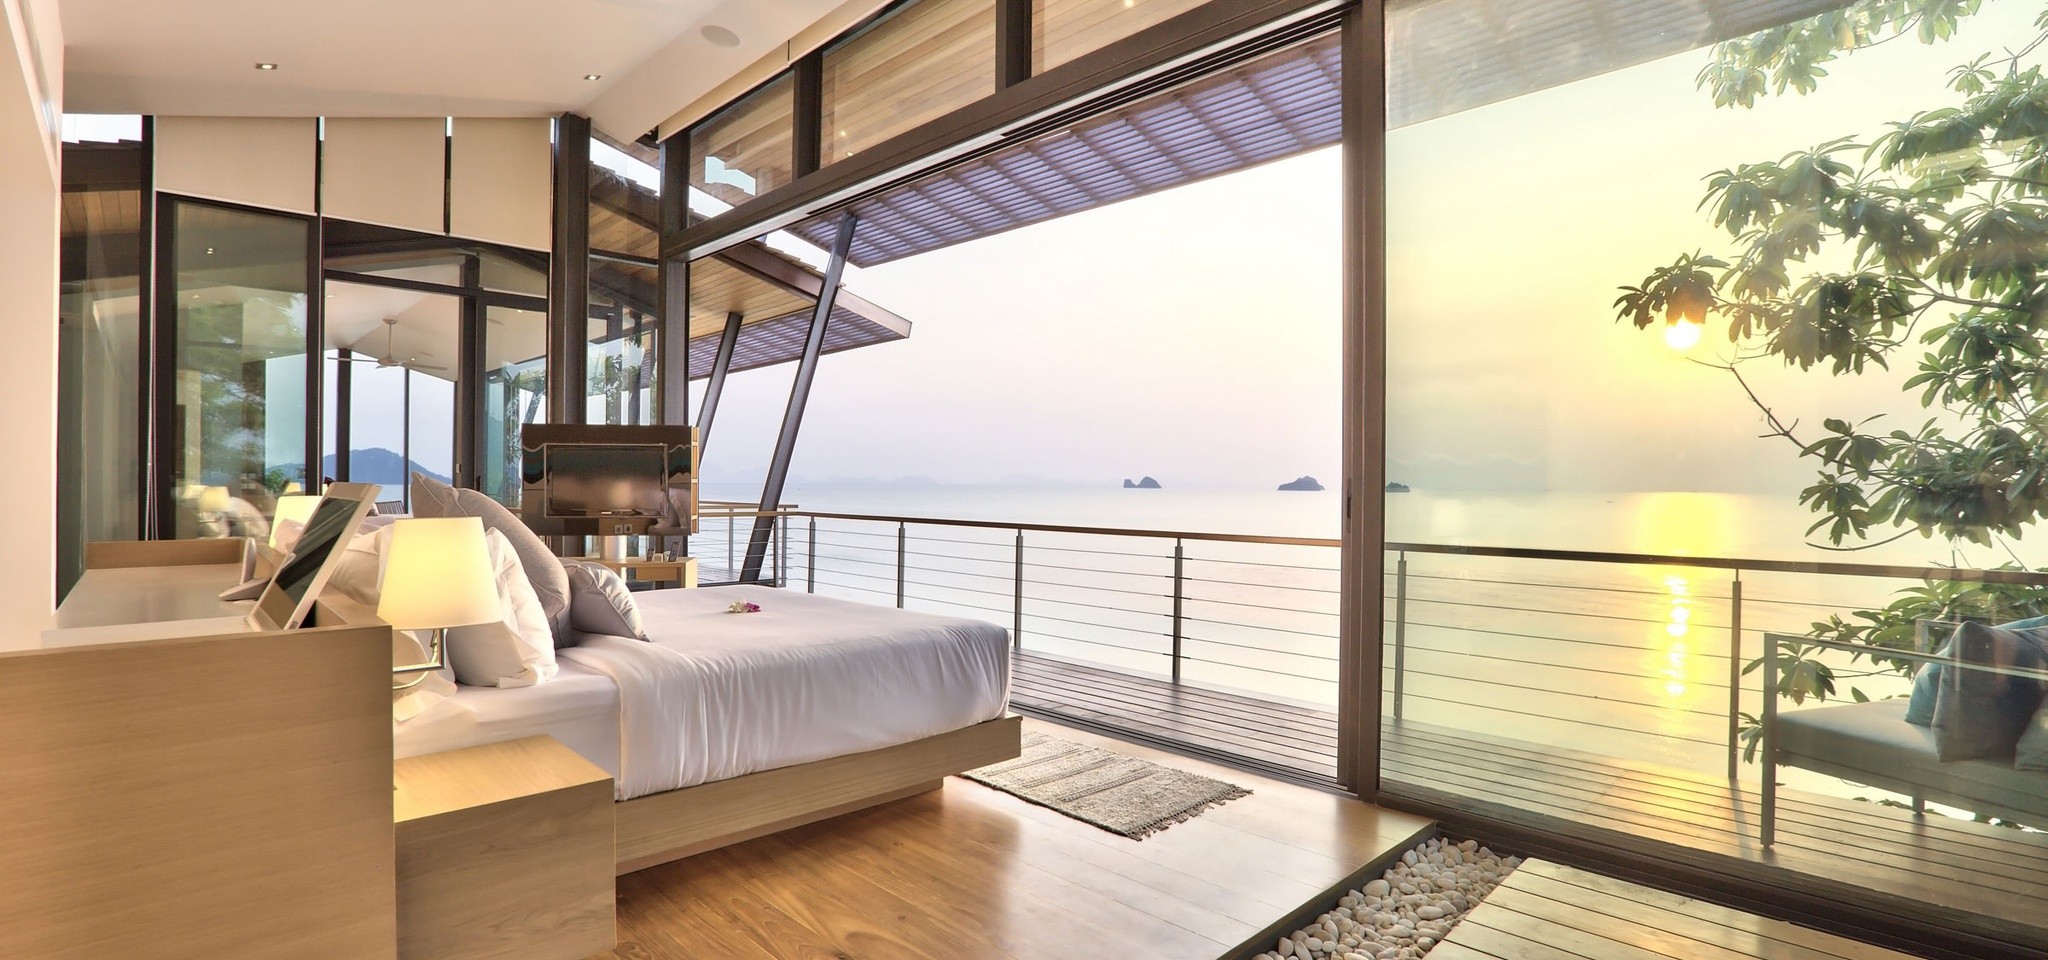 TheView Bedroom View – The View Samui – Samui – Thailand